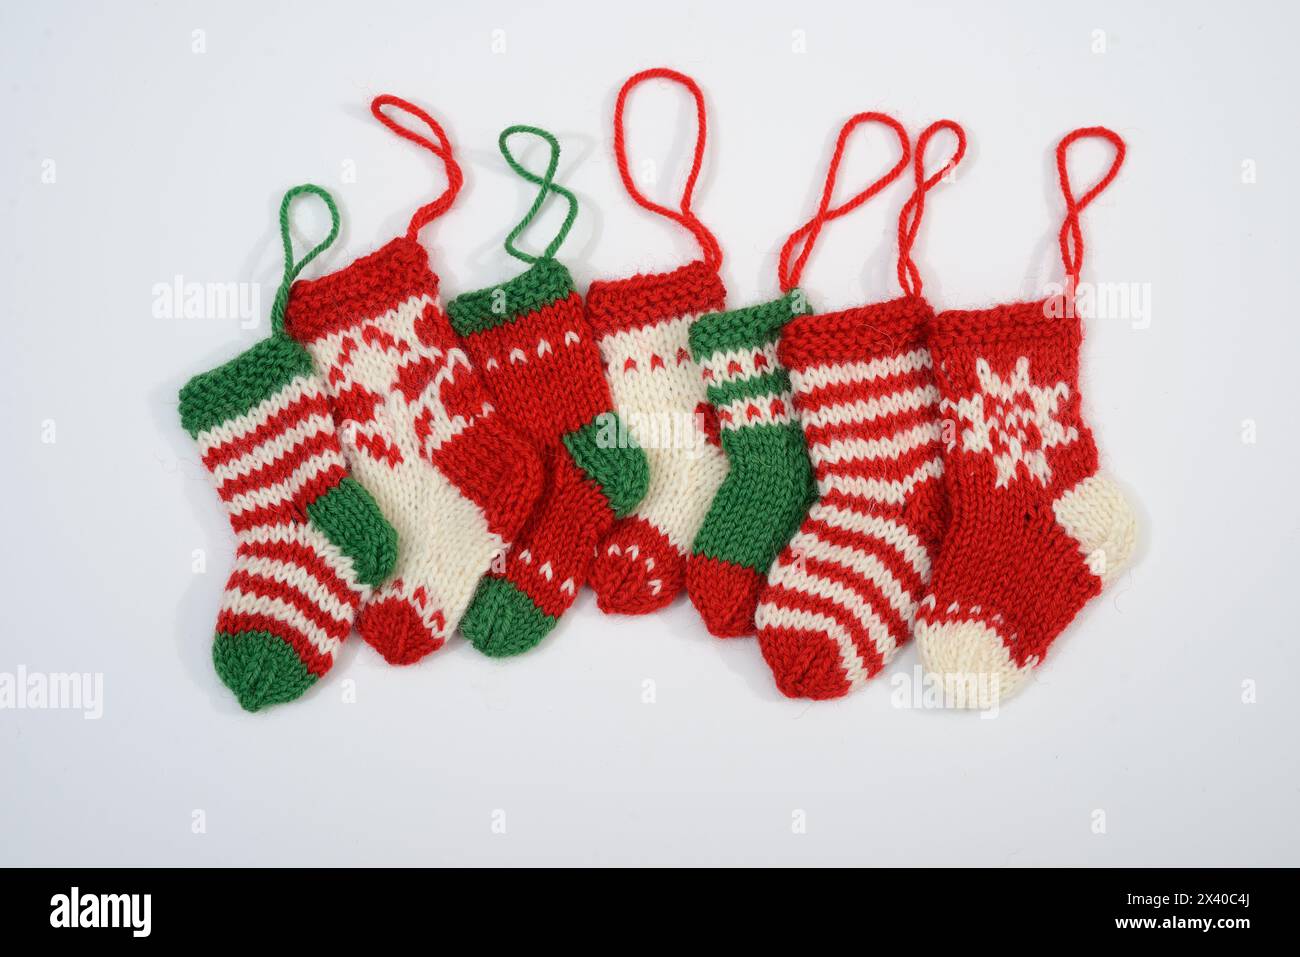 Cozy family tradition captured in handcrafted holiday stockings, adorned with festive designs and warm memories Stock Photo